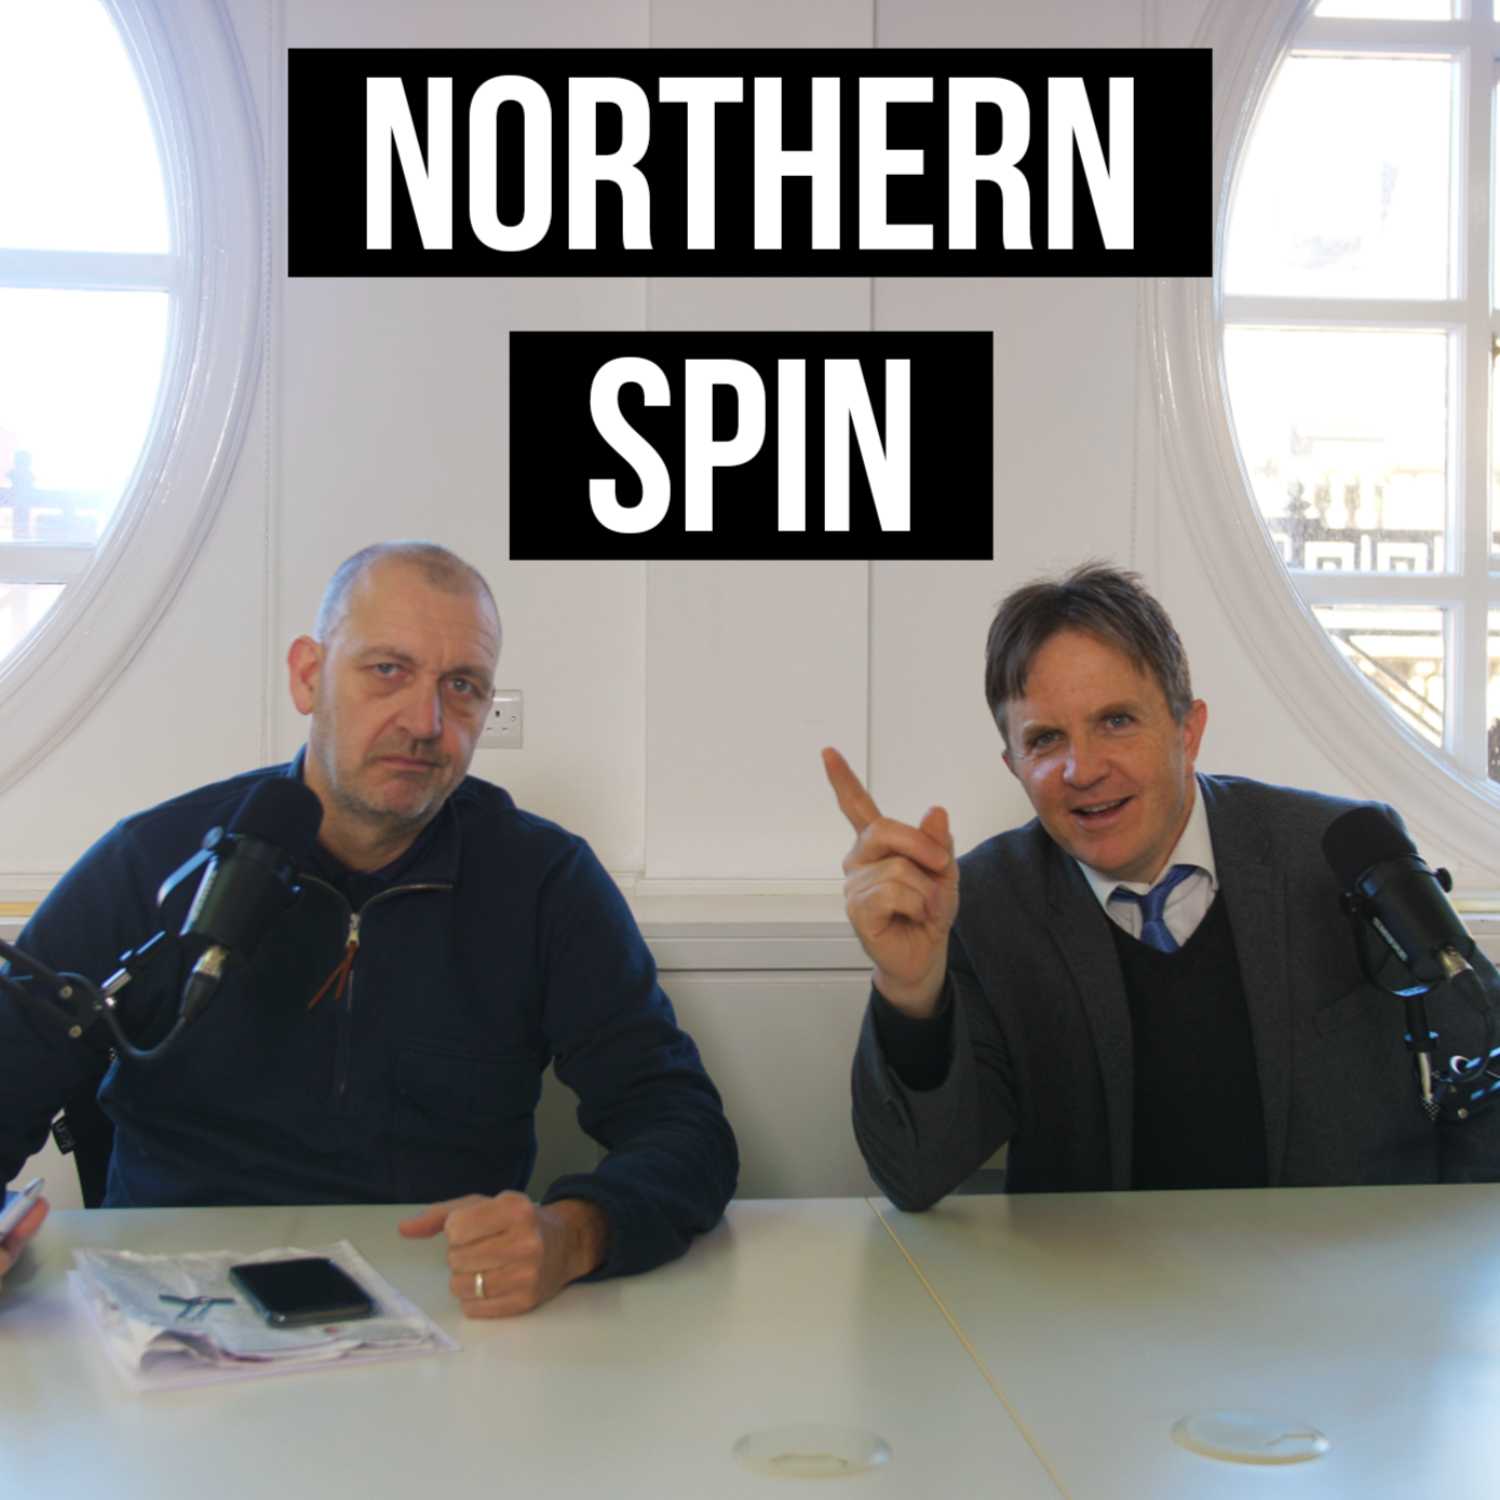 Northern Spin - Season 4 - Episode 4: Hanging out with the Labour Creatives